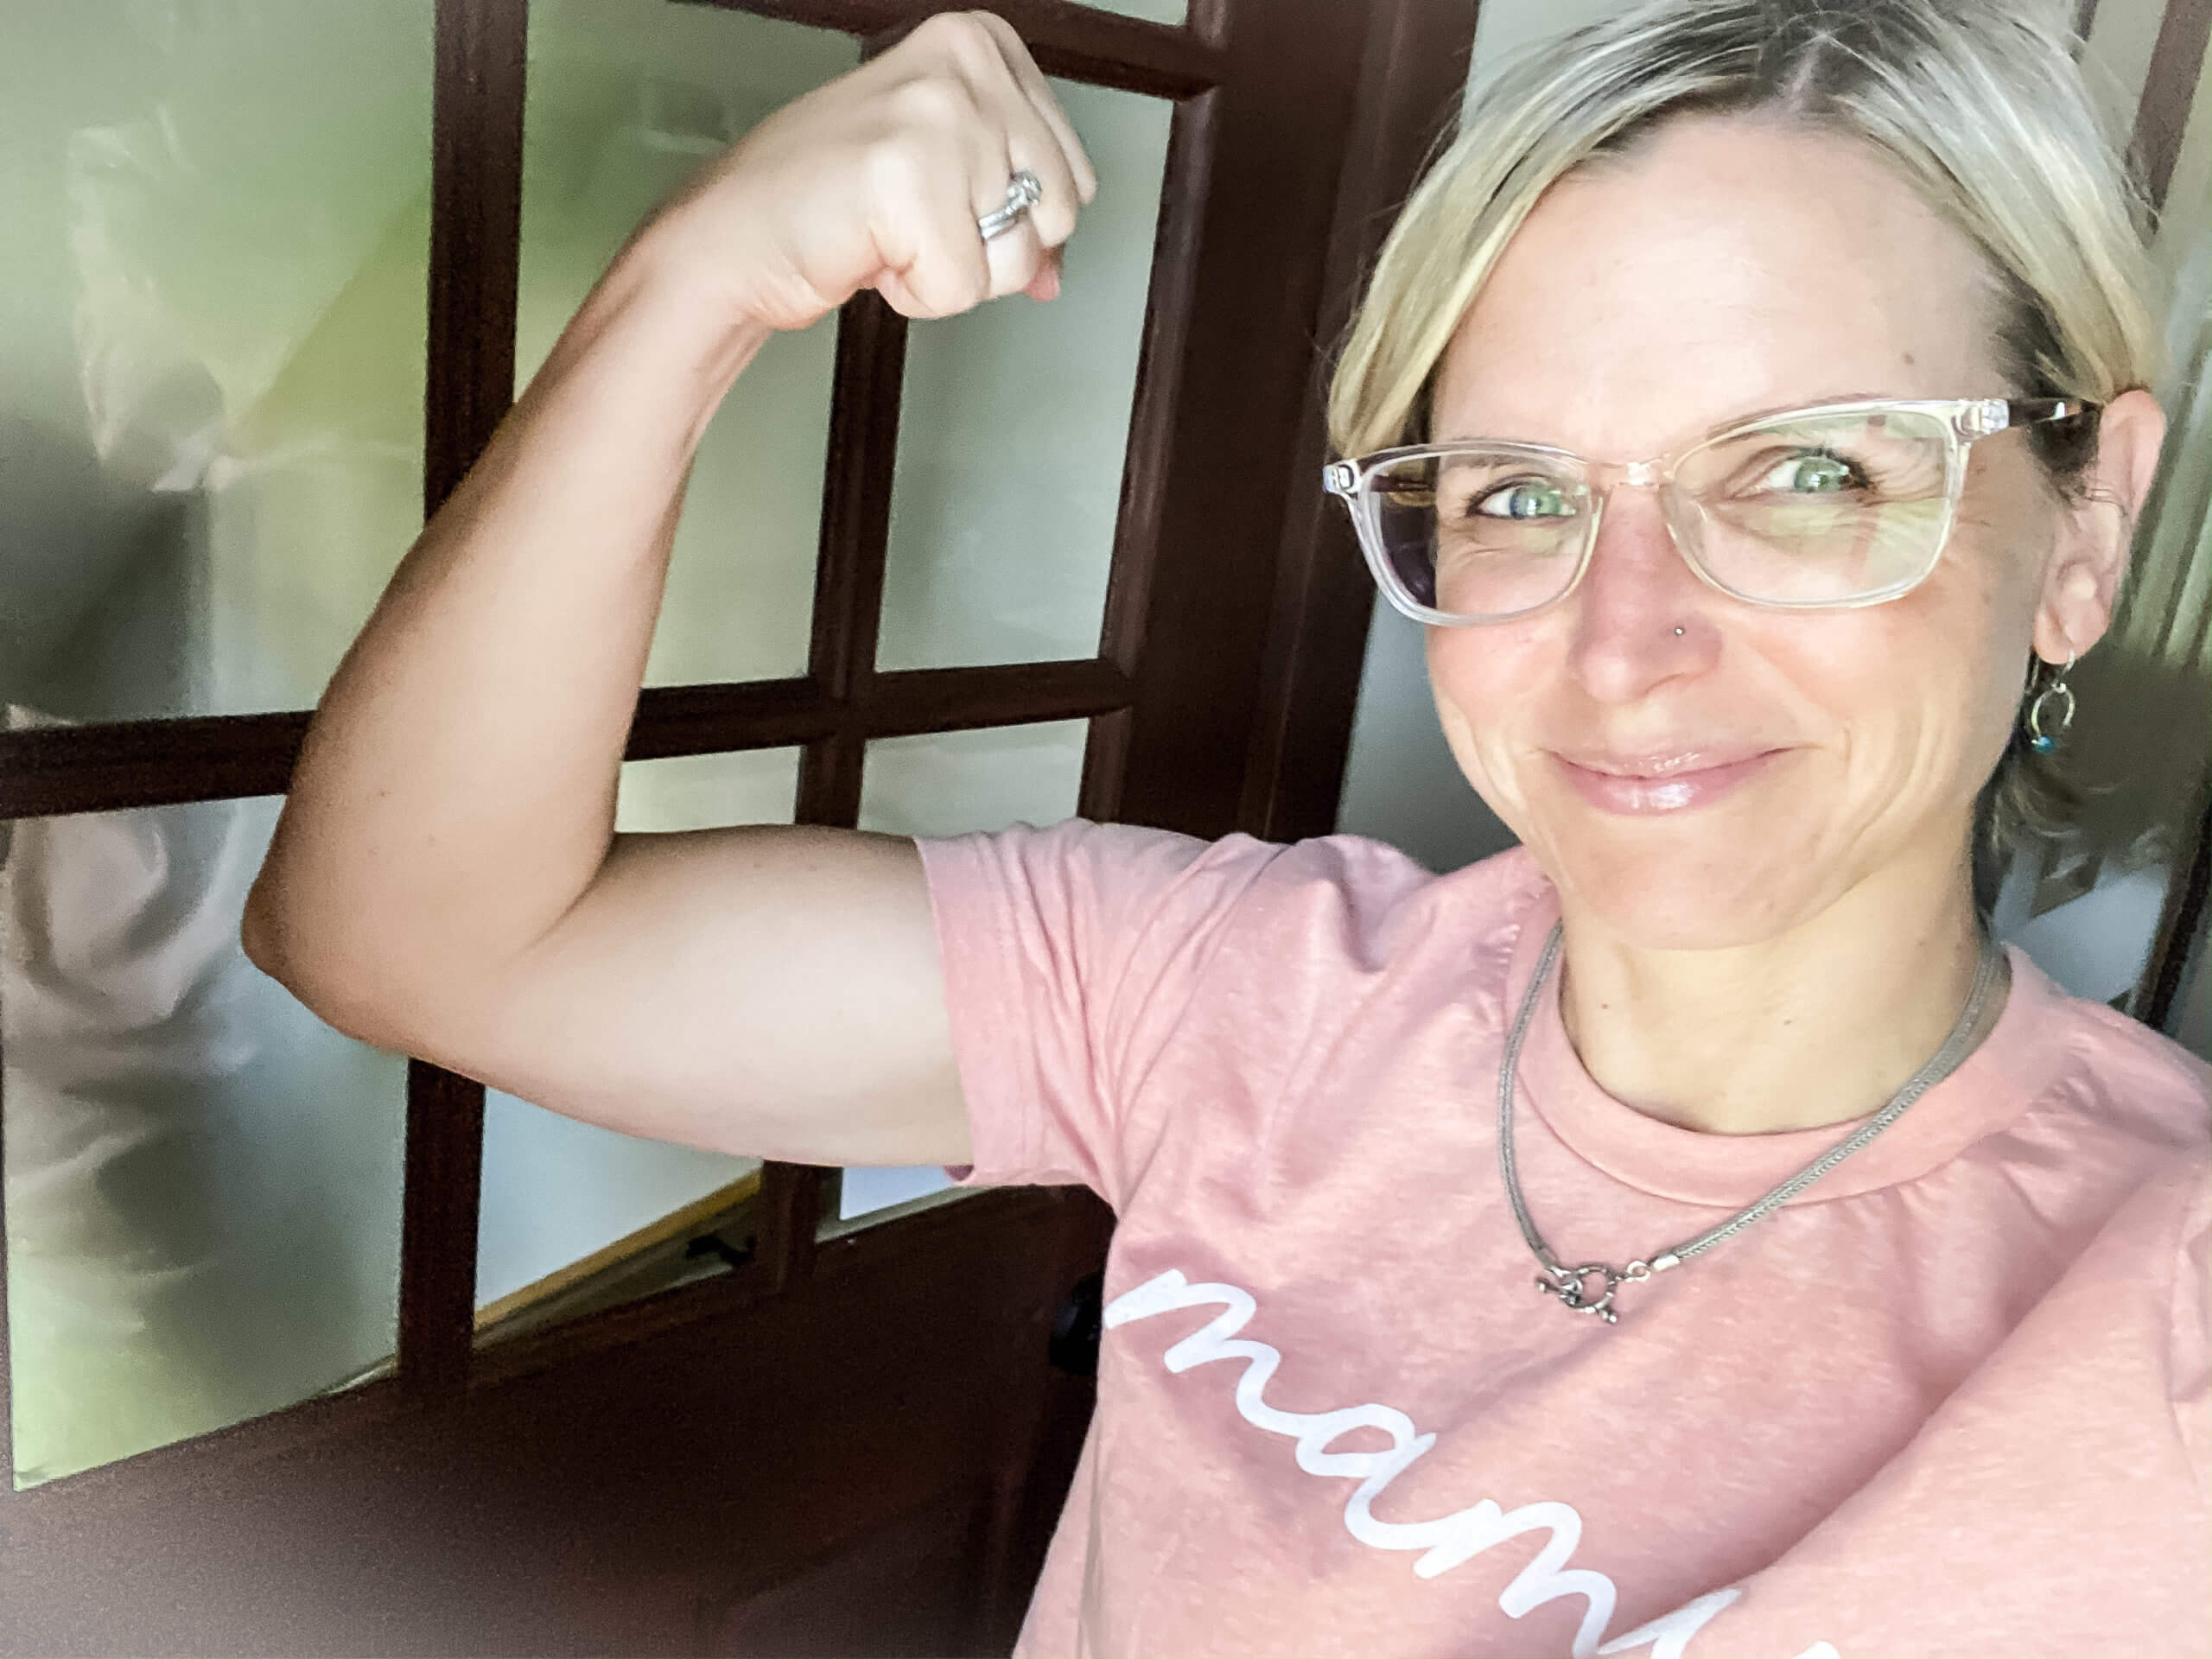 Mags, a white woman with short blond hair, blue eyes, and clear-rimmed glasses, takes a selfie with her other arm held up in a fist, making a muscle.